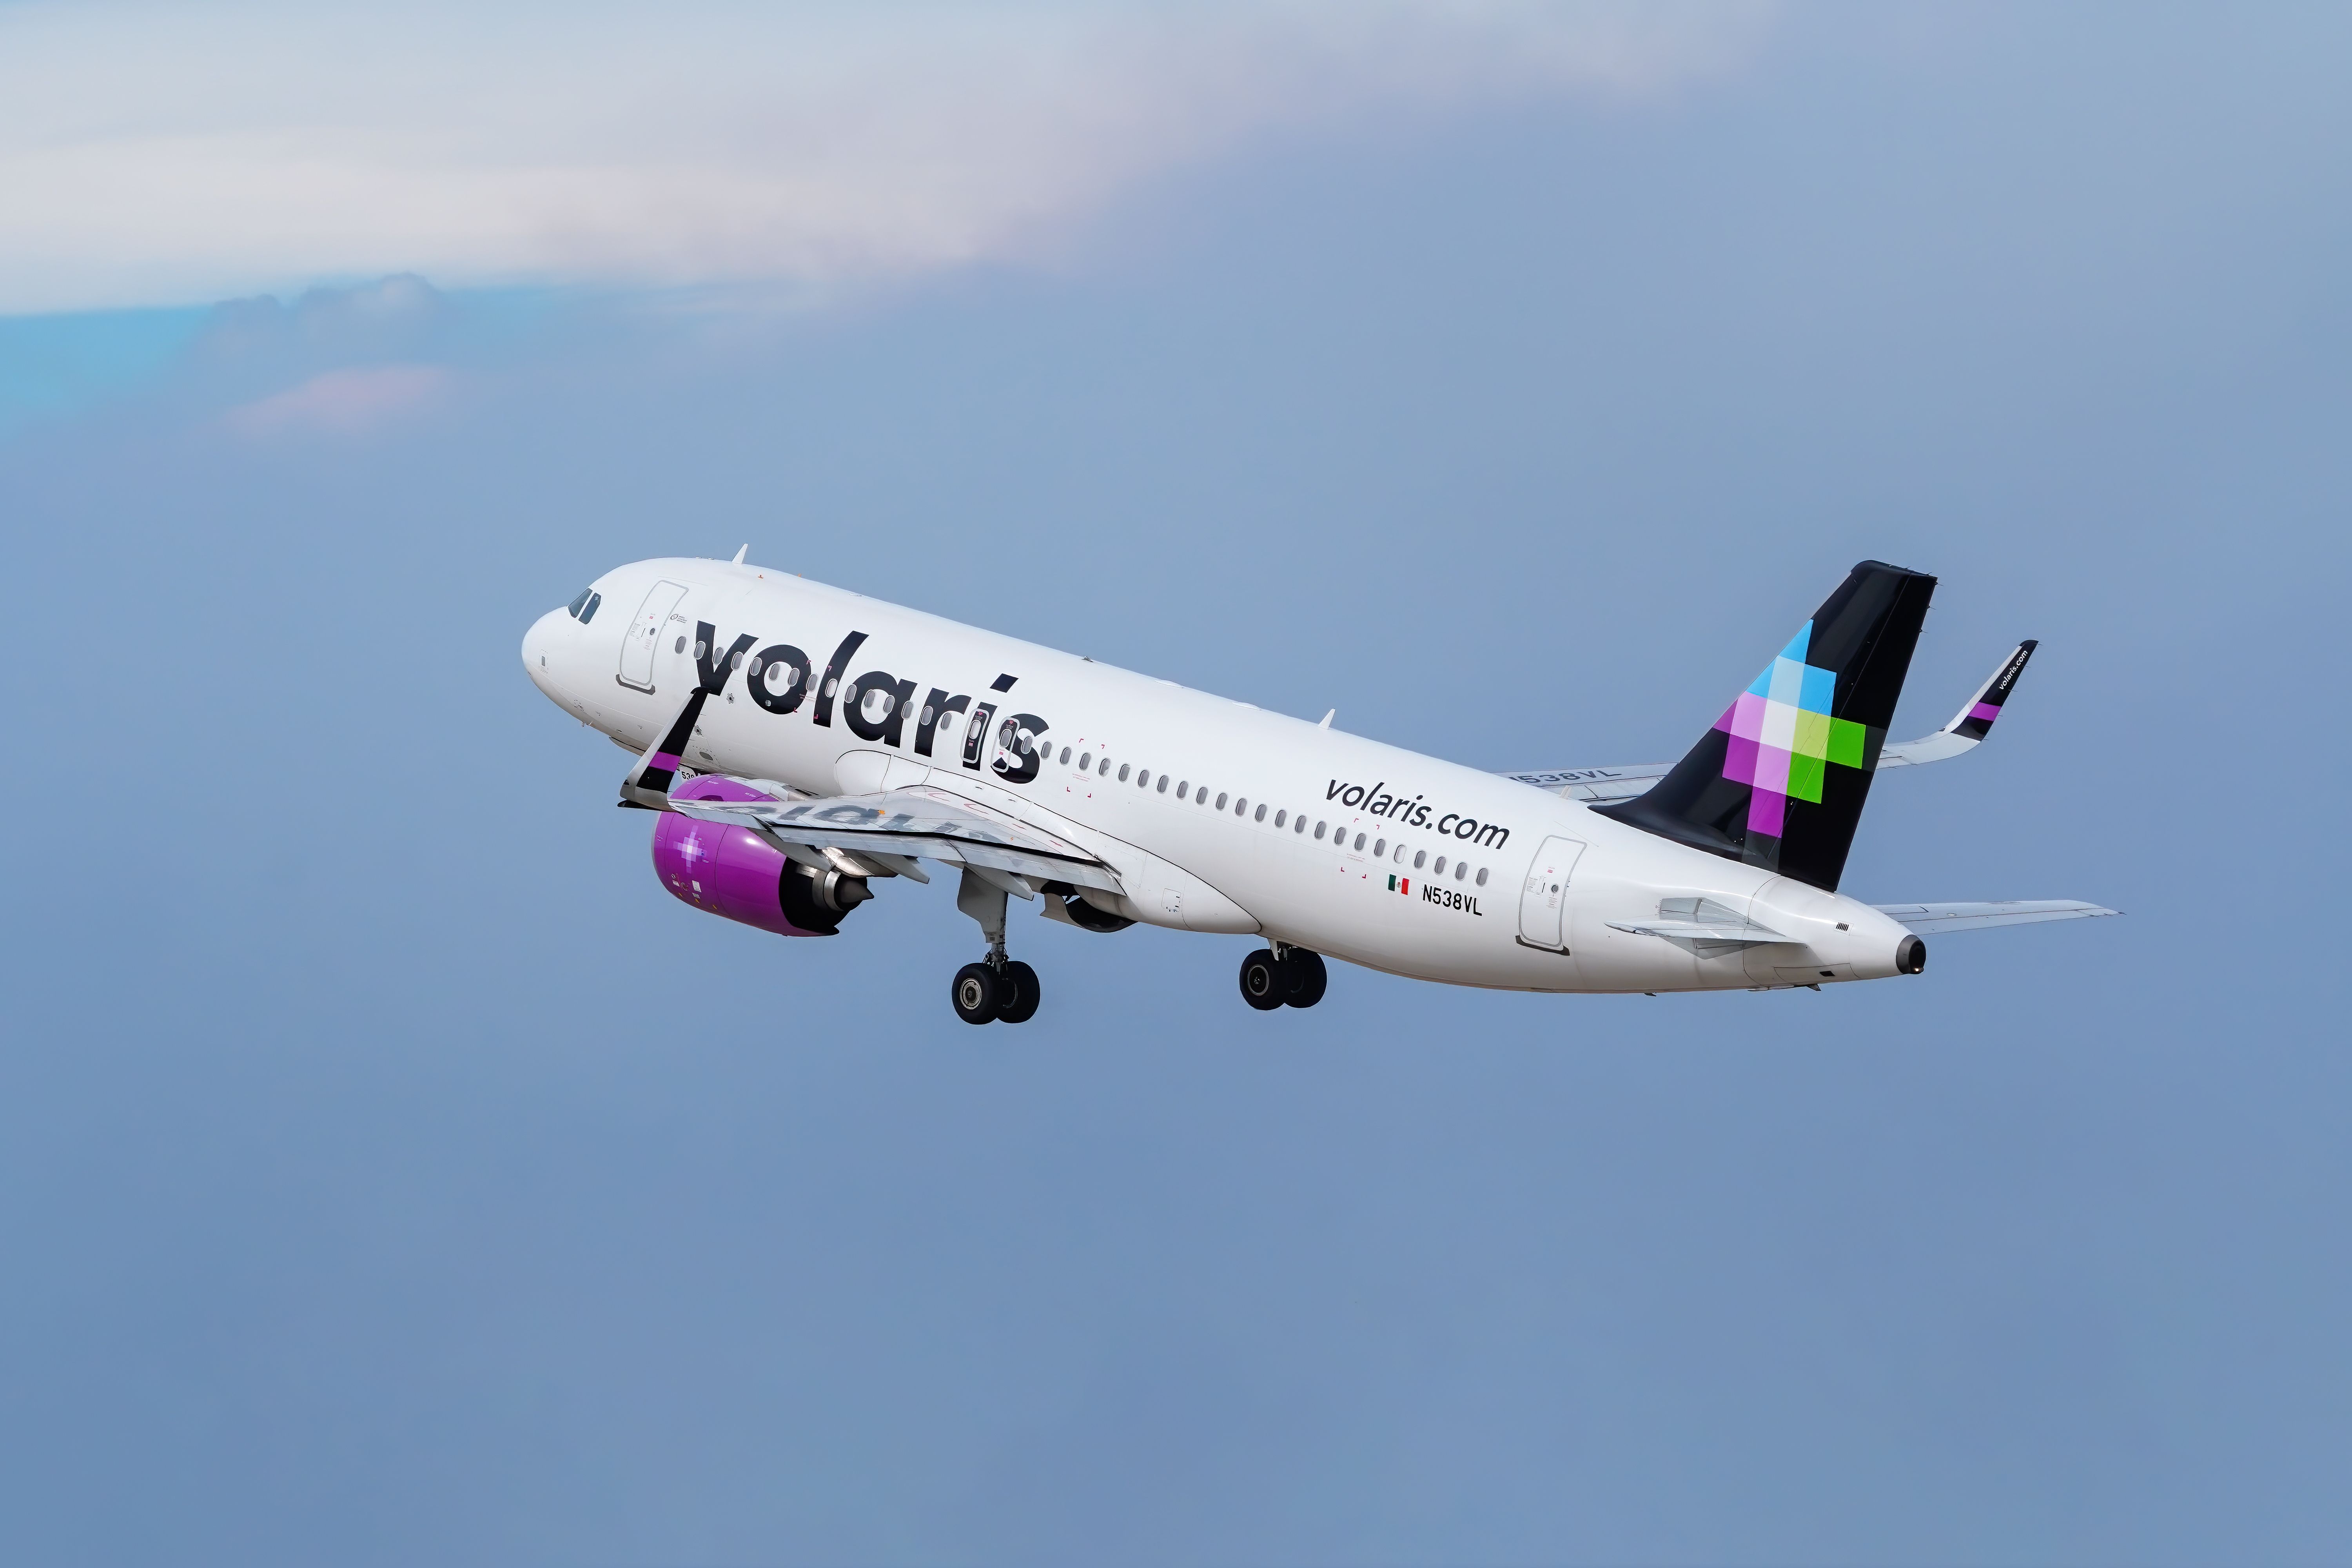 Airbus A320 operated by Volaris takes off on October 17, 2020 from Denver International Airport, Colorado.